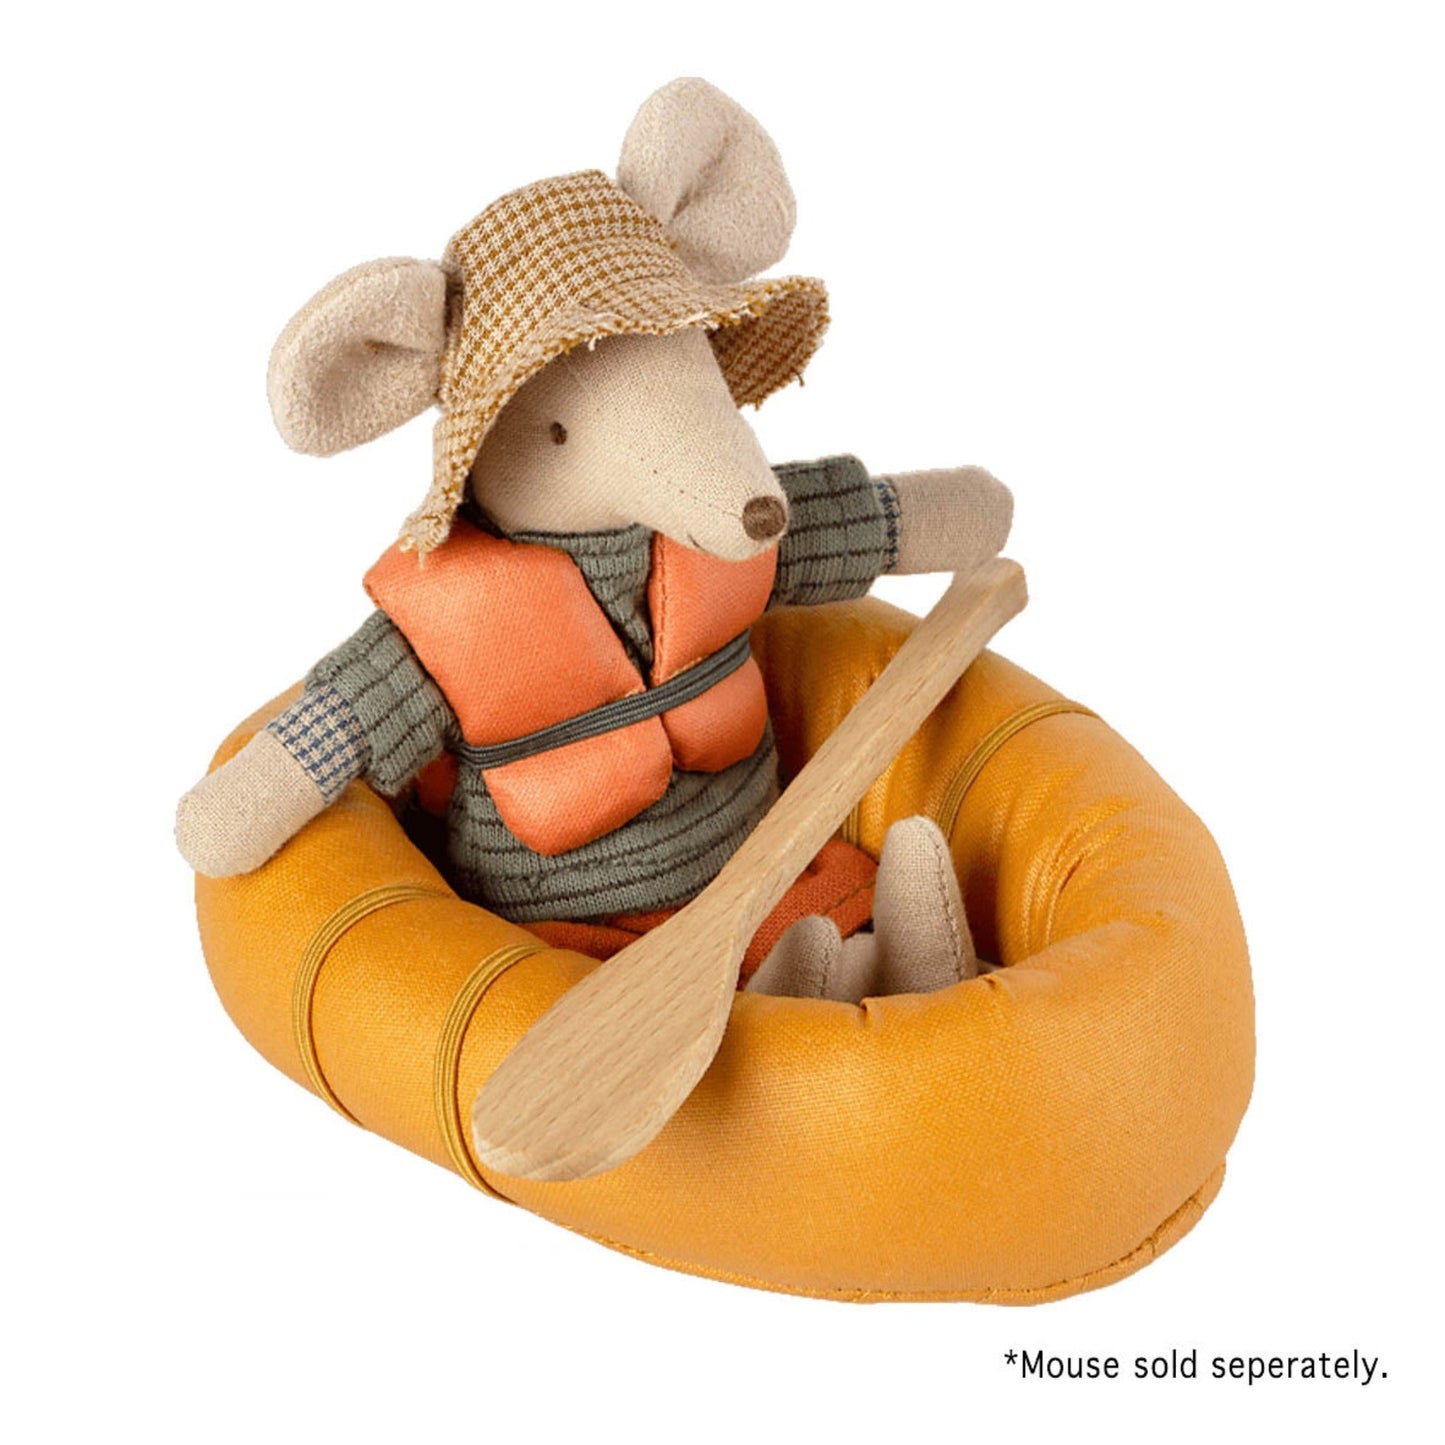 MAILEG Rubber Boat for Mouse, Dusty Yellow (6589484695617)